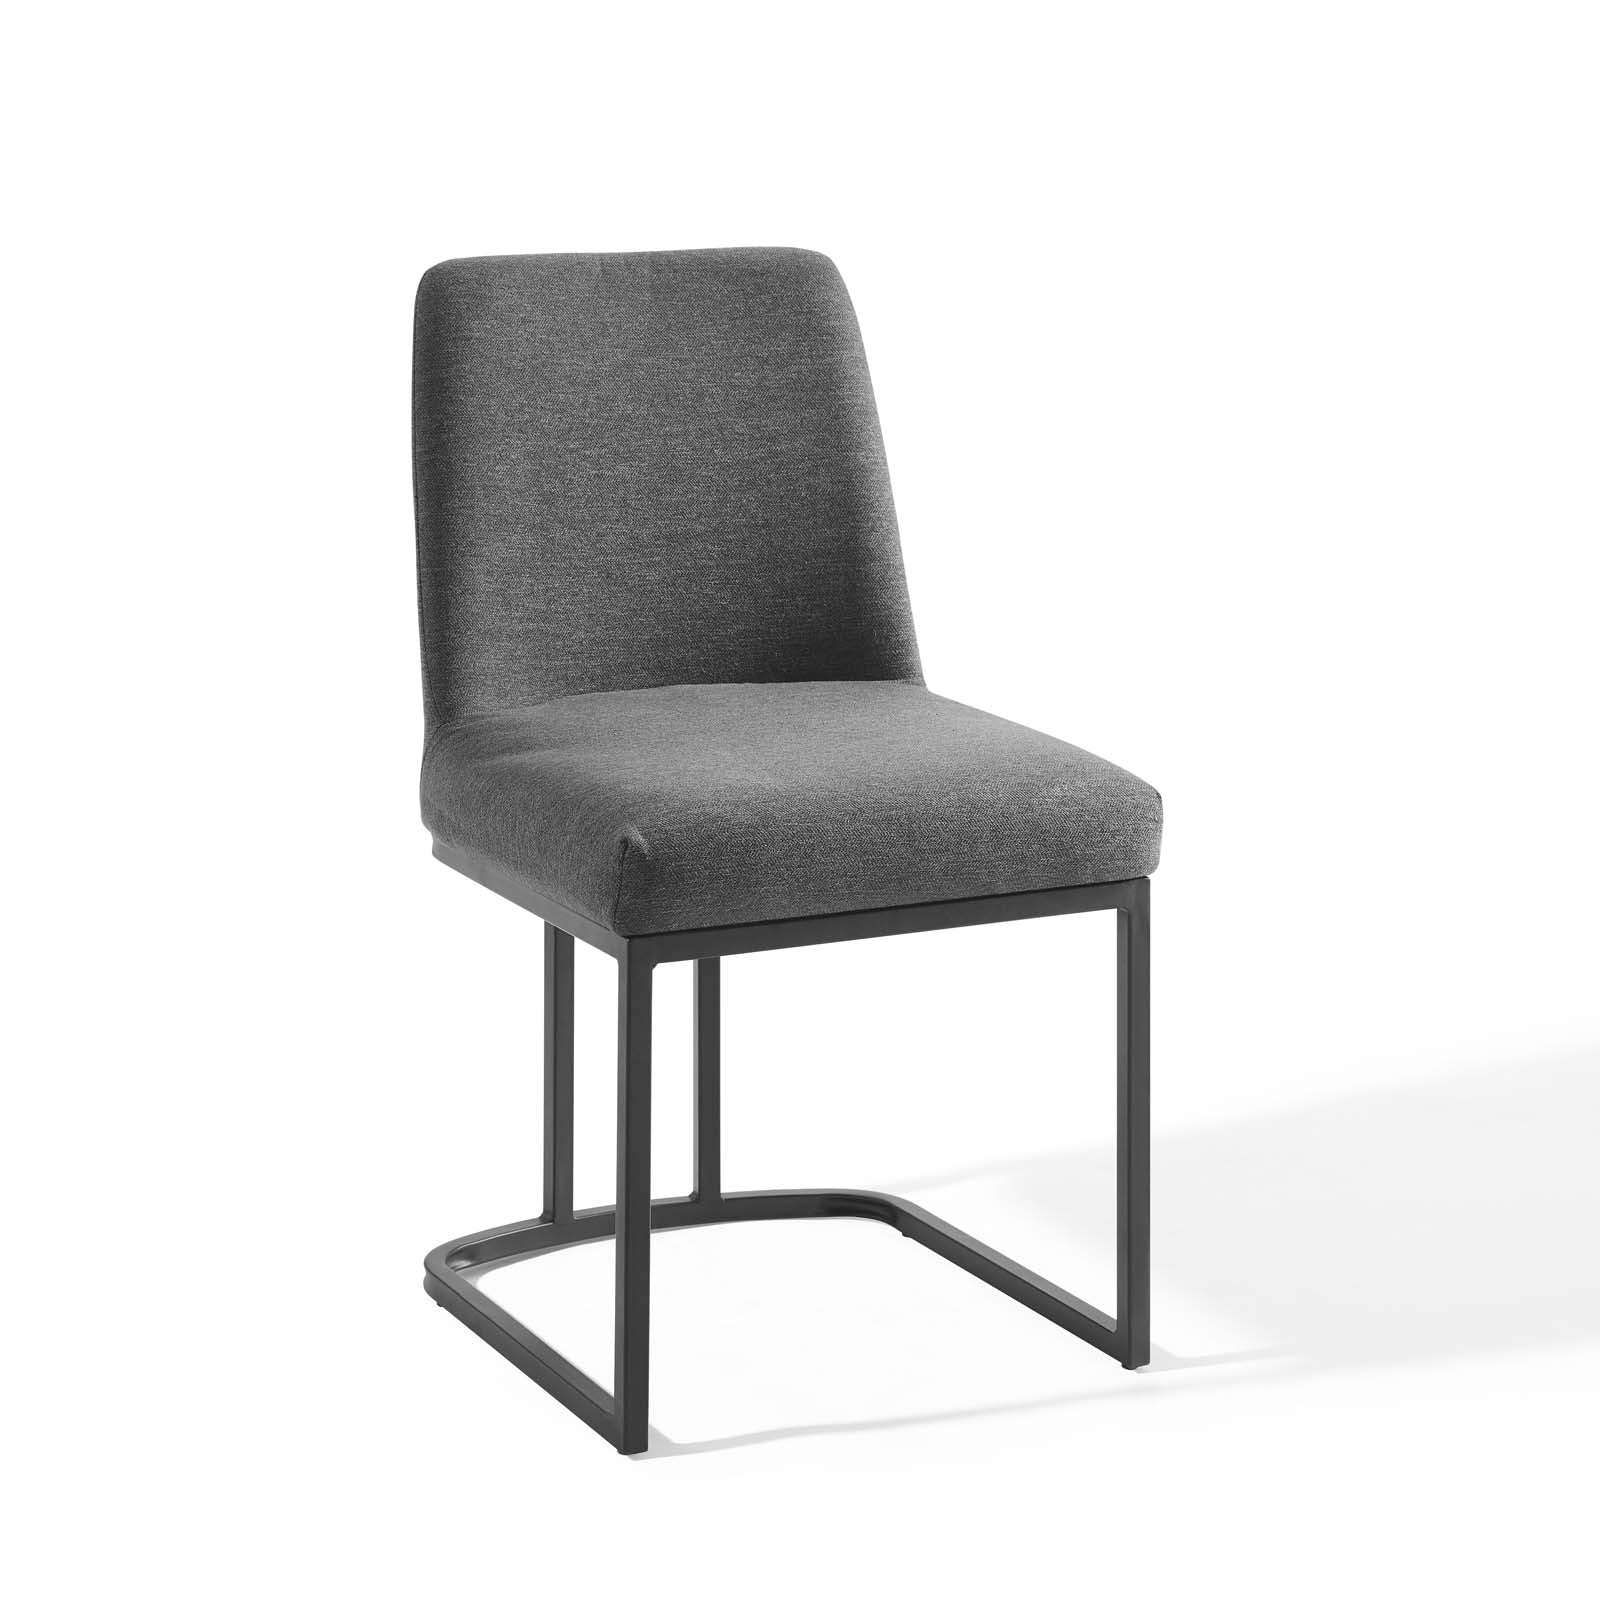 Amplify Sled Base Upholstered Fabric Dining Side Chair - East Shore Modern Home Furnishings